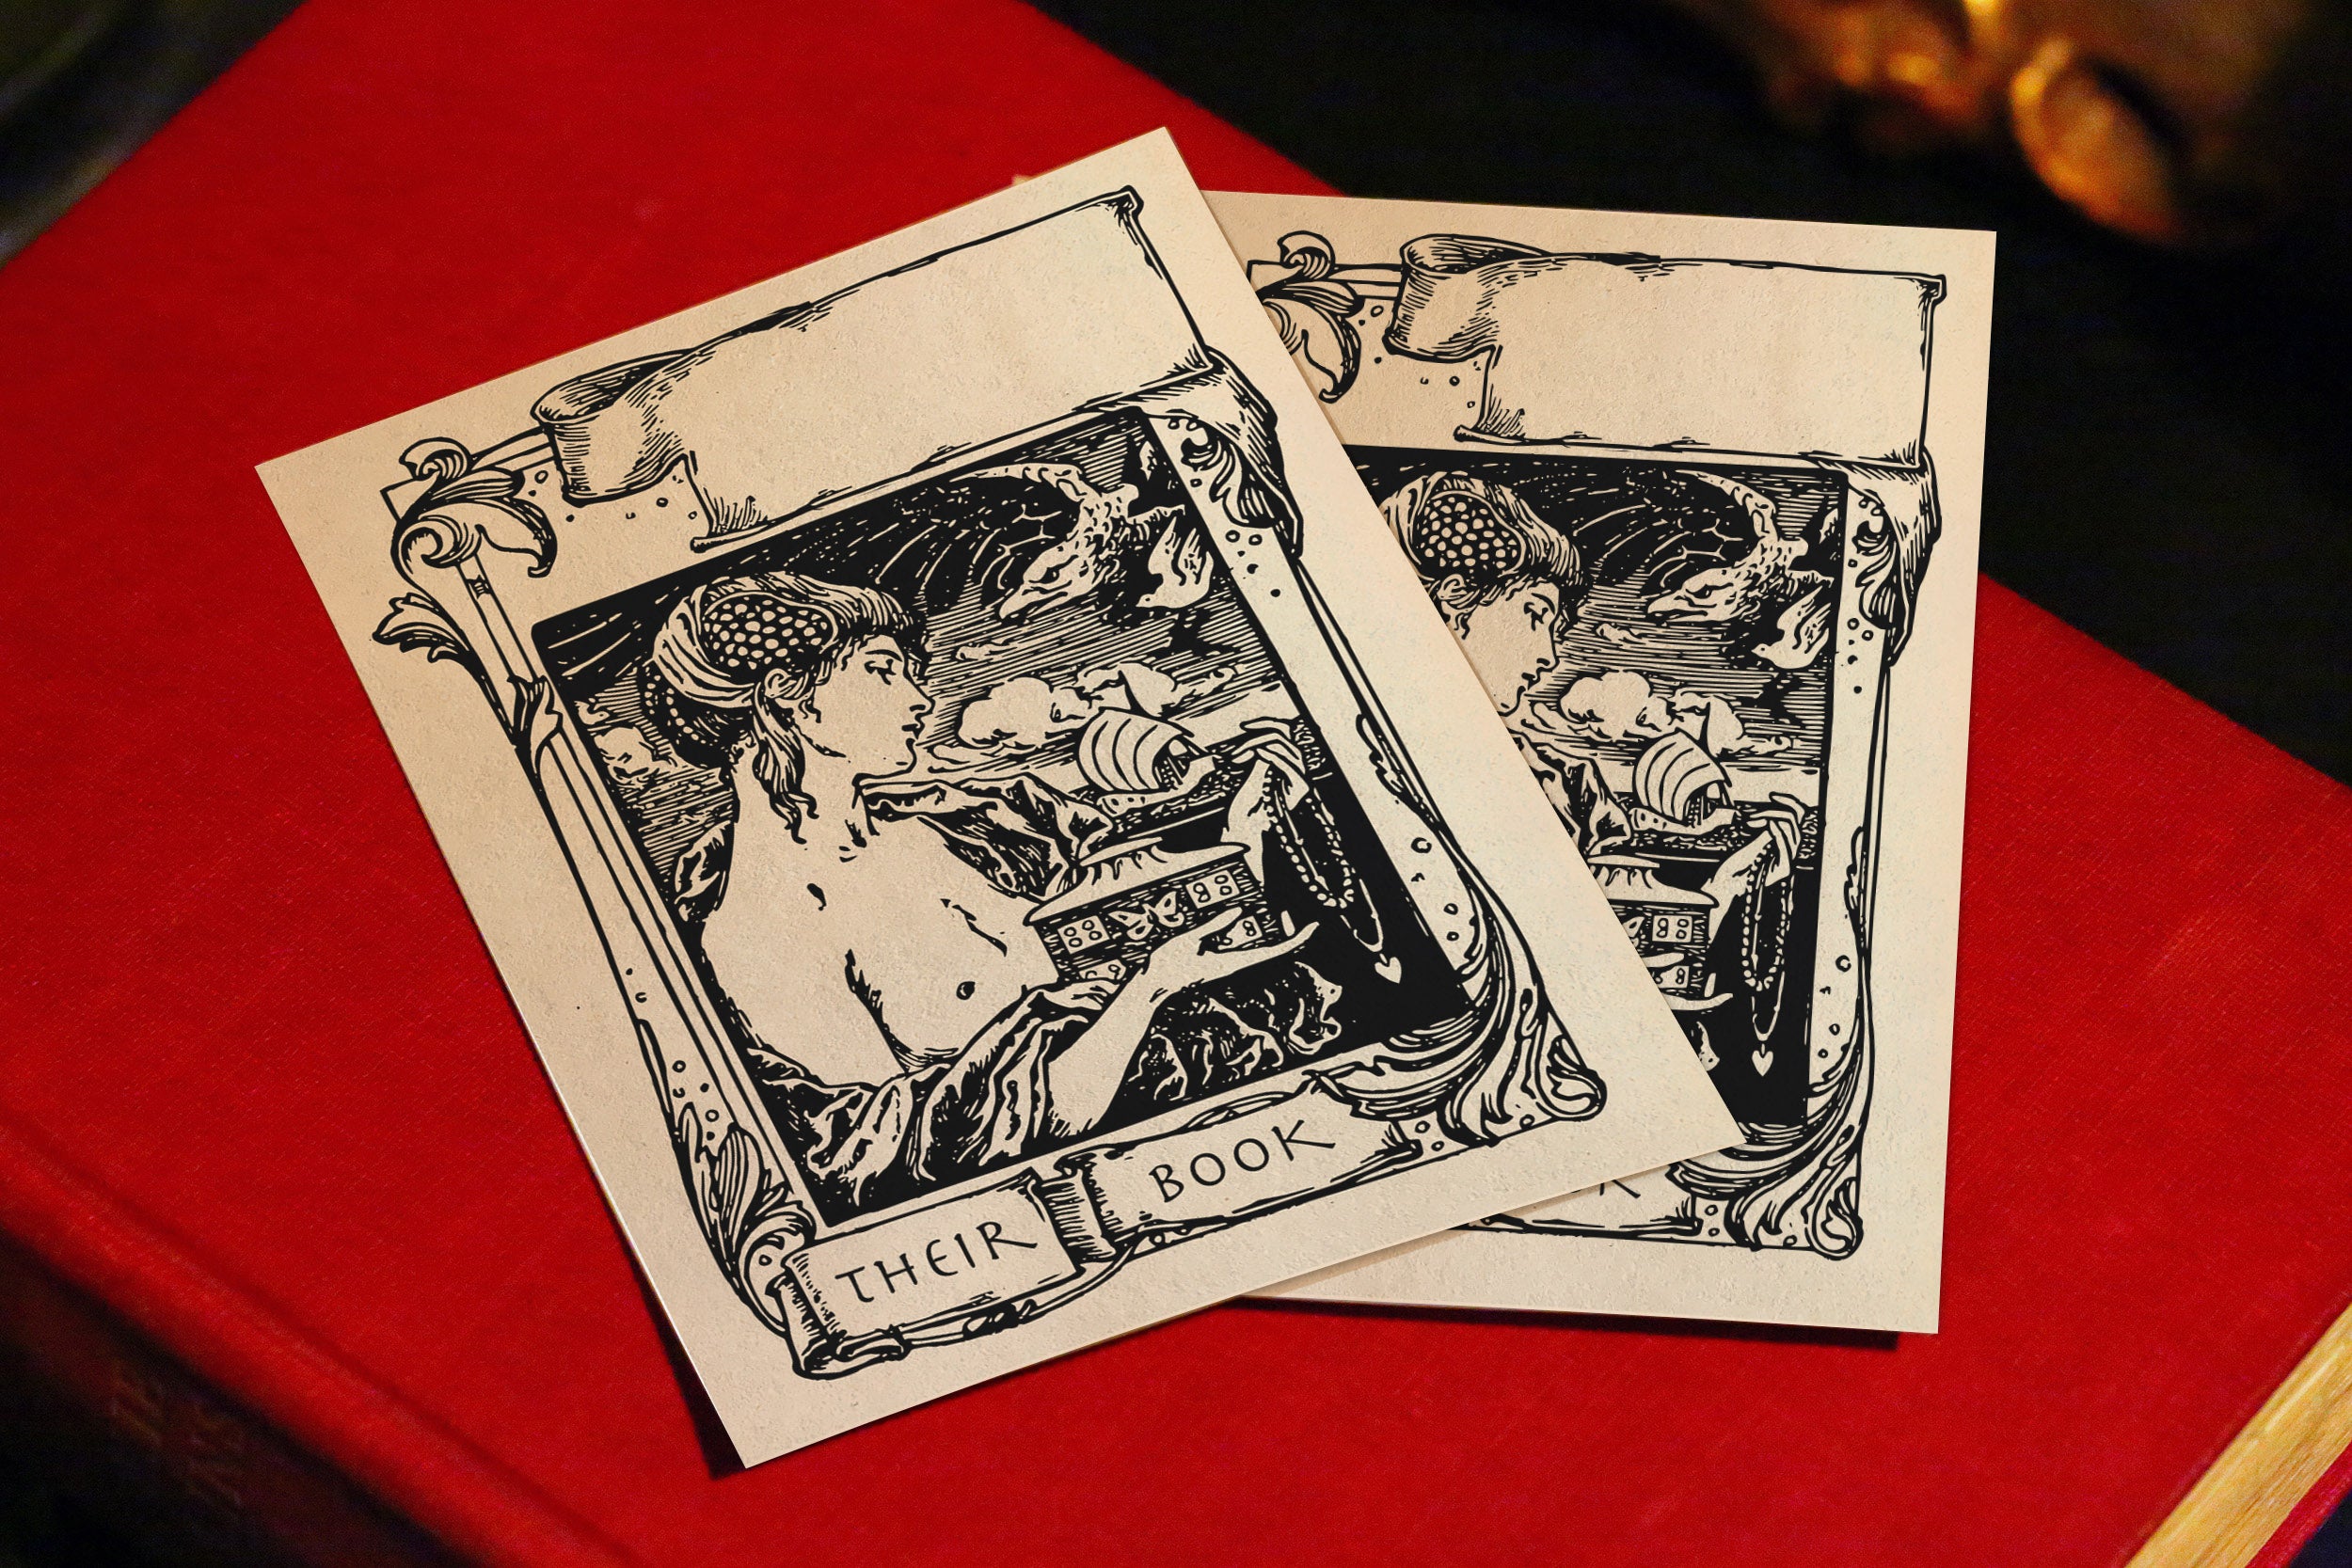 Pandora's Box, Personalized Erotic Ex-Libris Bookplates, Crafted on Traditional Gummed Paper, 3in x 4in, Set of 30